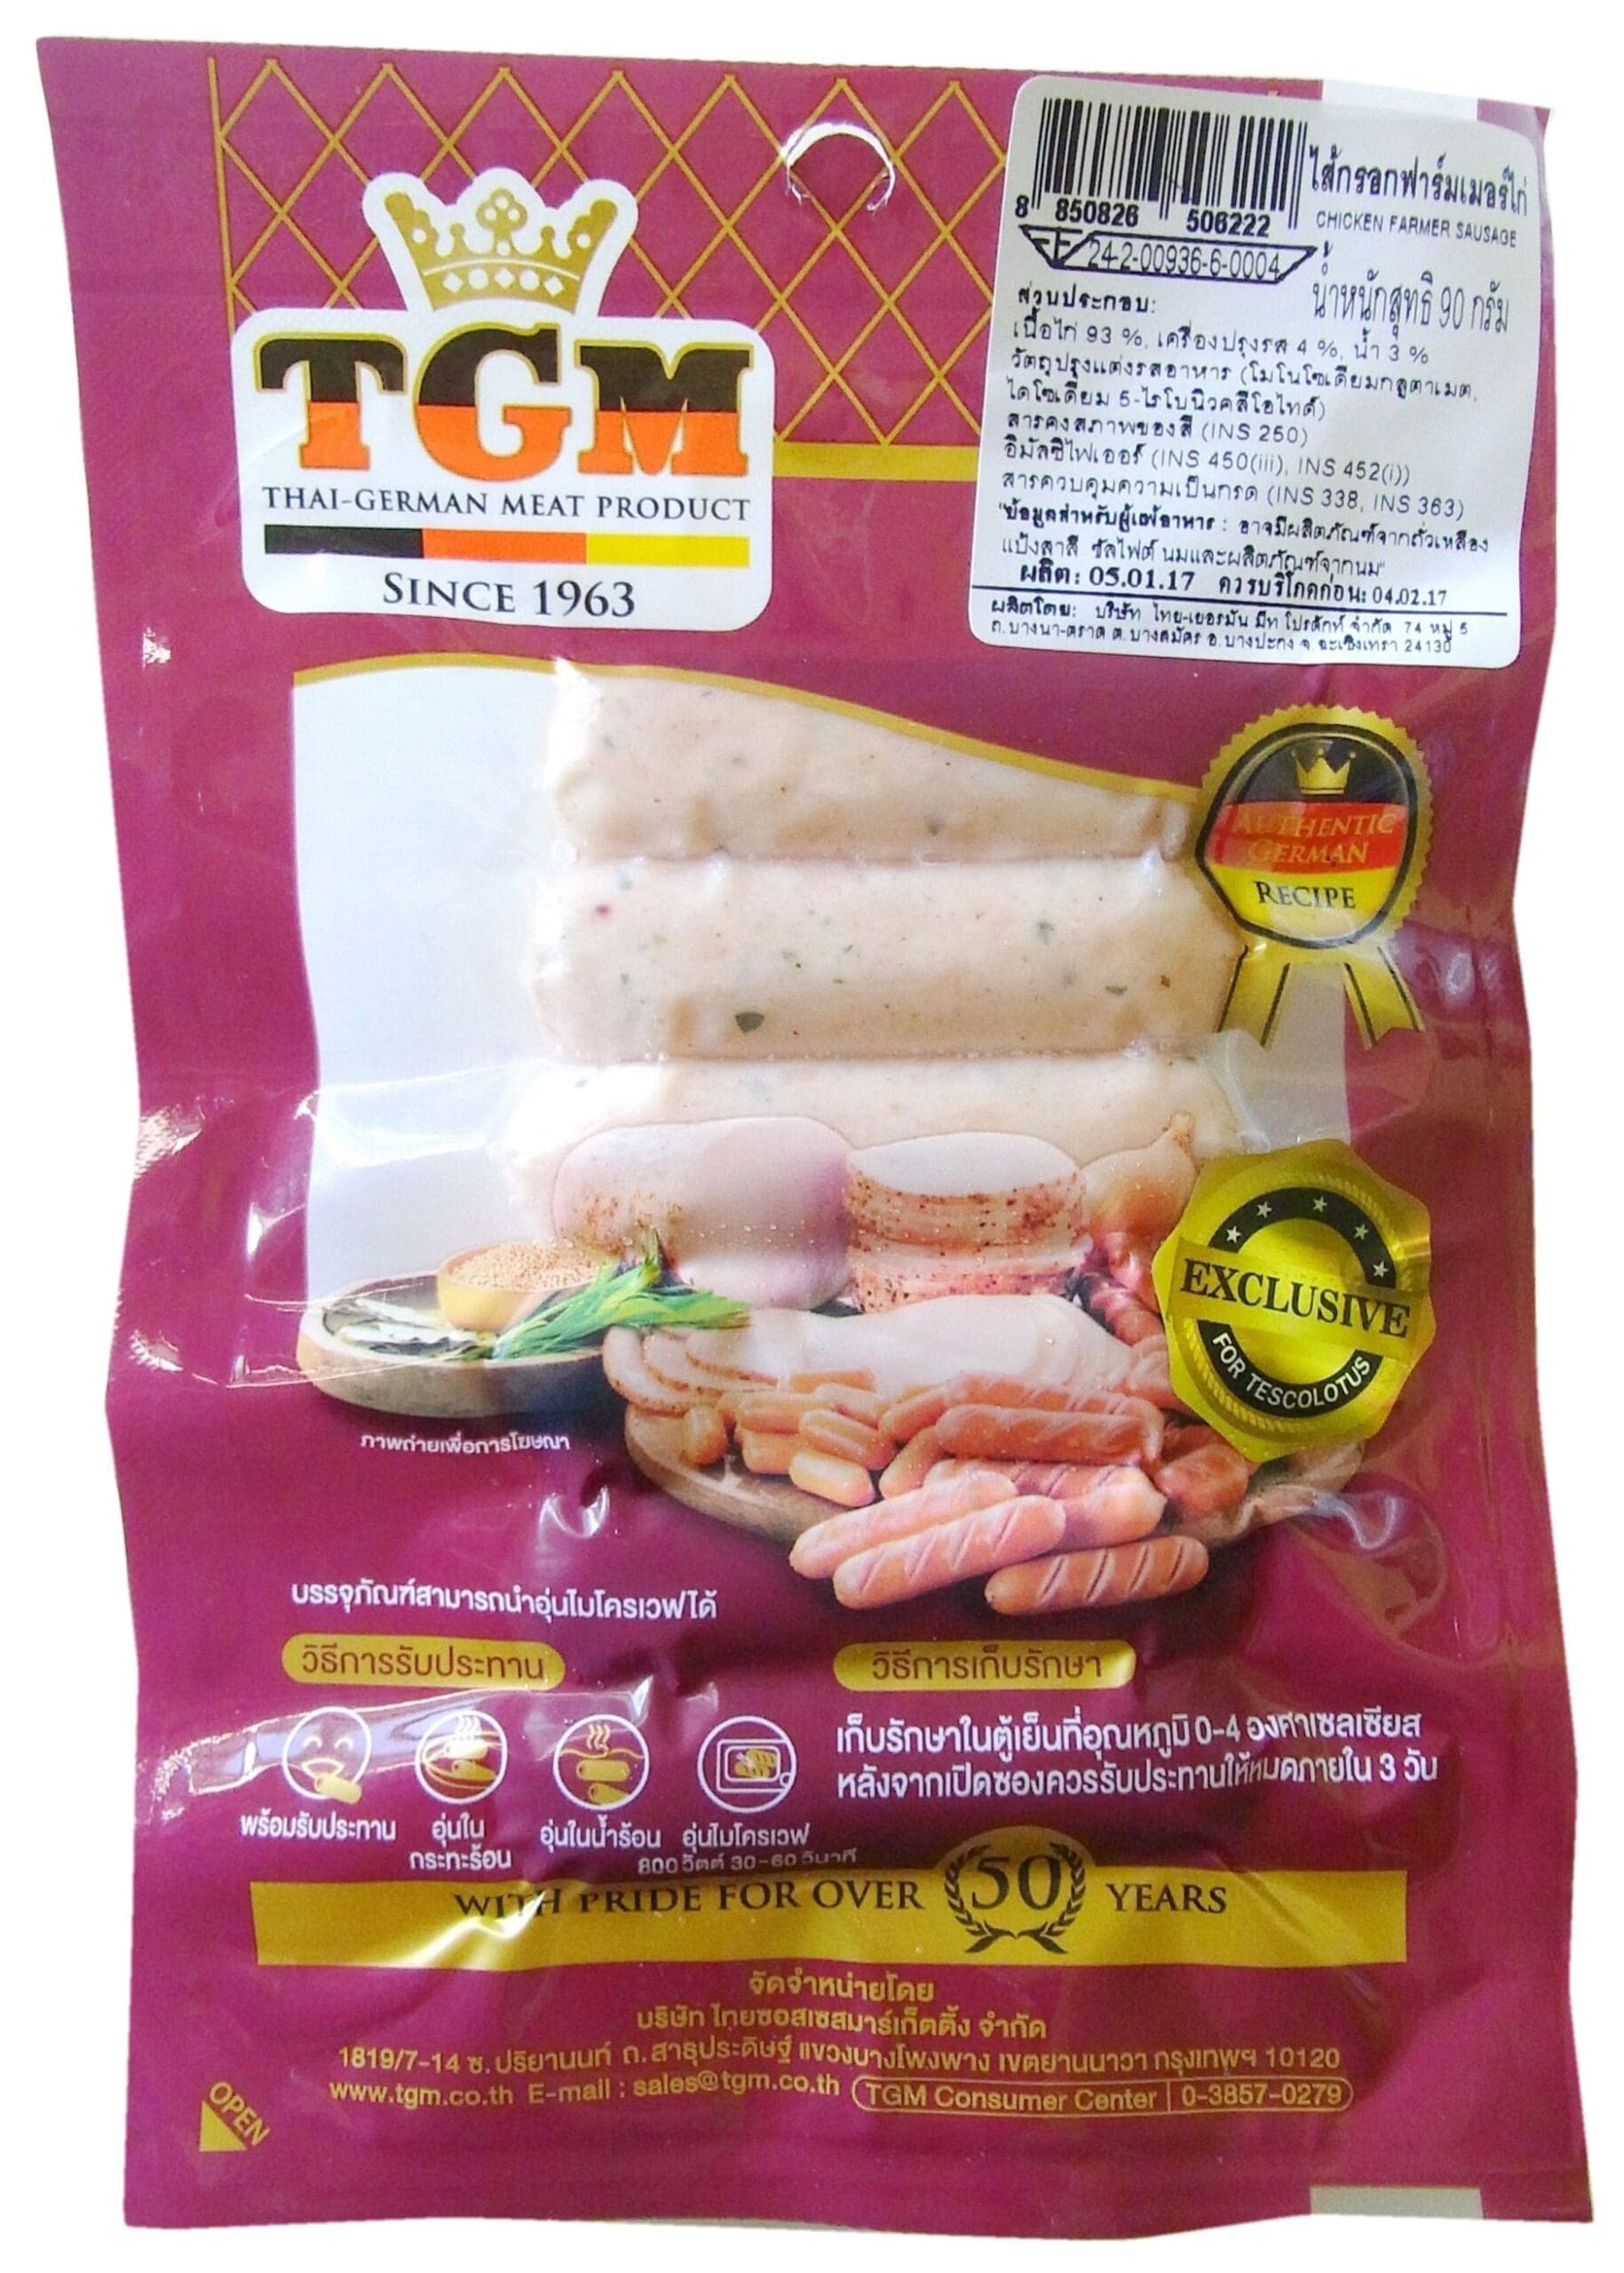 Thai German Meat Products